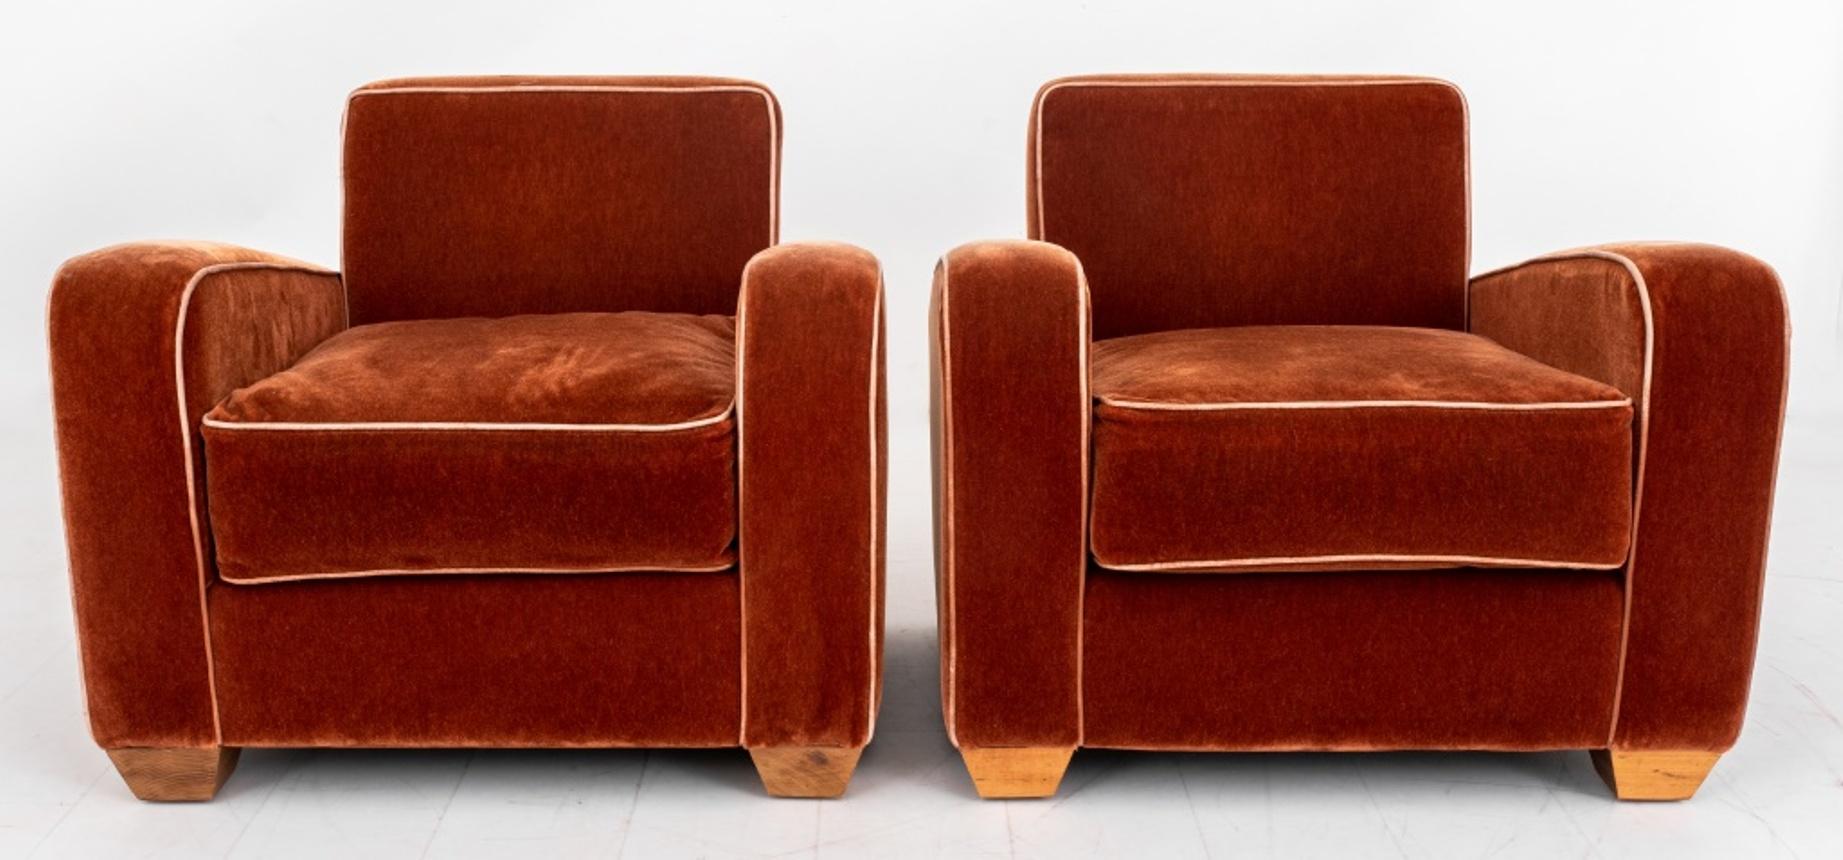 
French Art Deco style club chairs in the manner of Jules Leleu (French, 1883-1961) for Maison Leleu, with square backs and angled arm panels flanking a square seat, upholstered allover in russet wool velvet with contrasting camel welt, on tapering